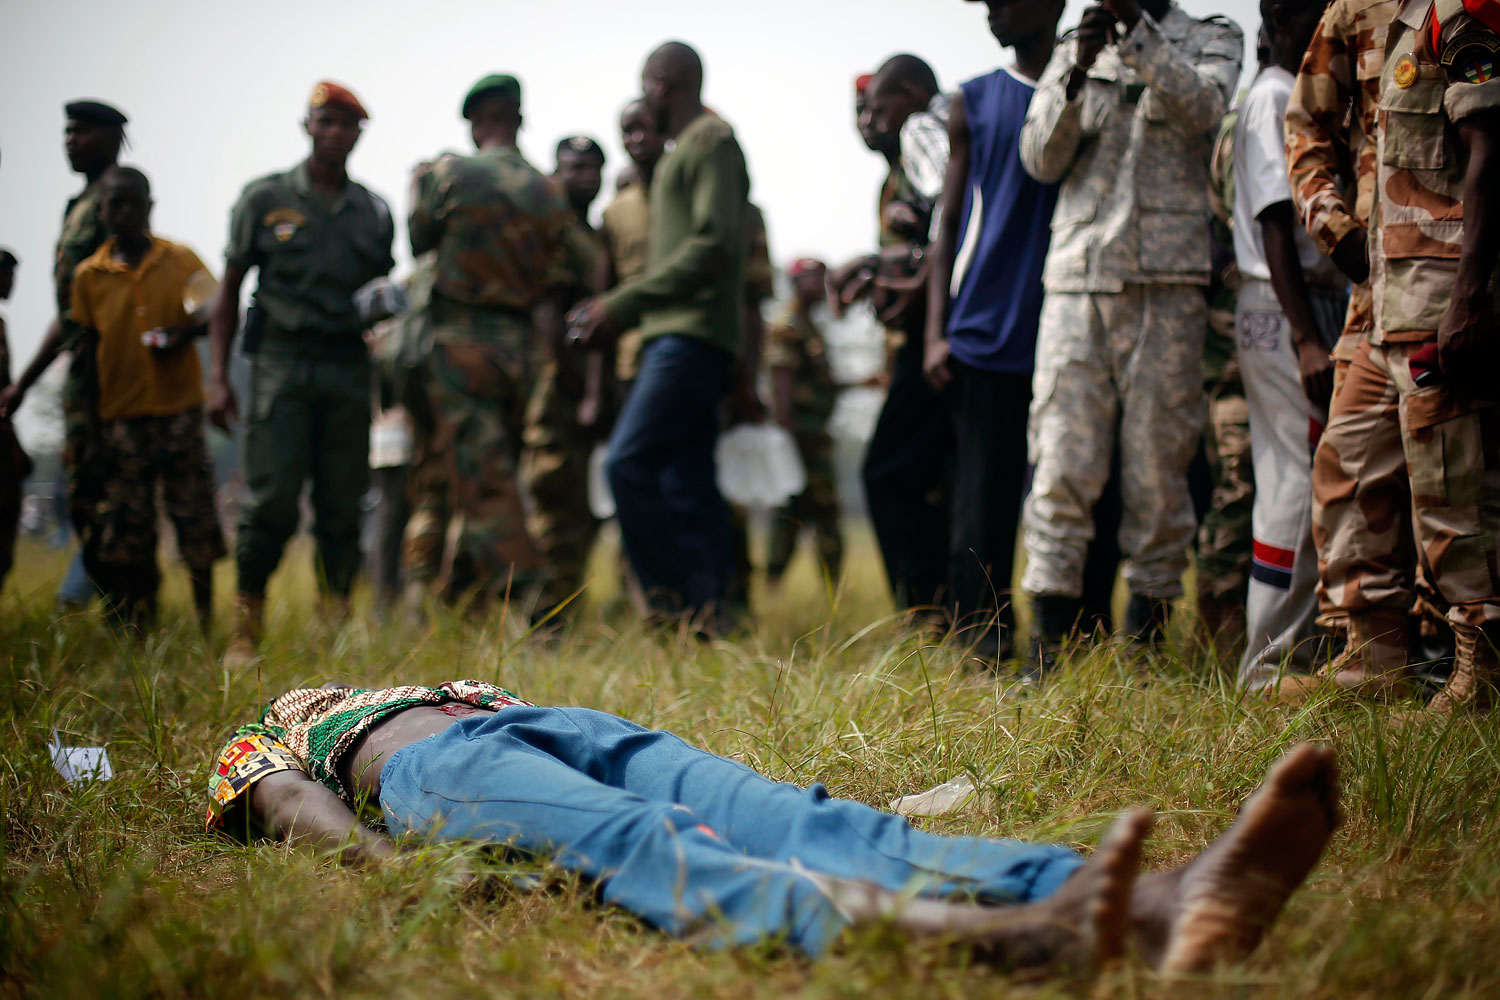 A man suspected to be a Muslim Seleka militiaman lays wounded after being stabbed by newly enlisted Central African Armed Forces soldiers moments after Central African Republic Interim President Catherine Samba-Panza addressed the troops in Bangui, Feb. 5, 2014.